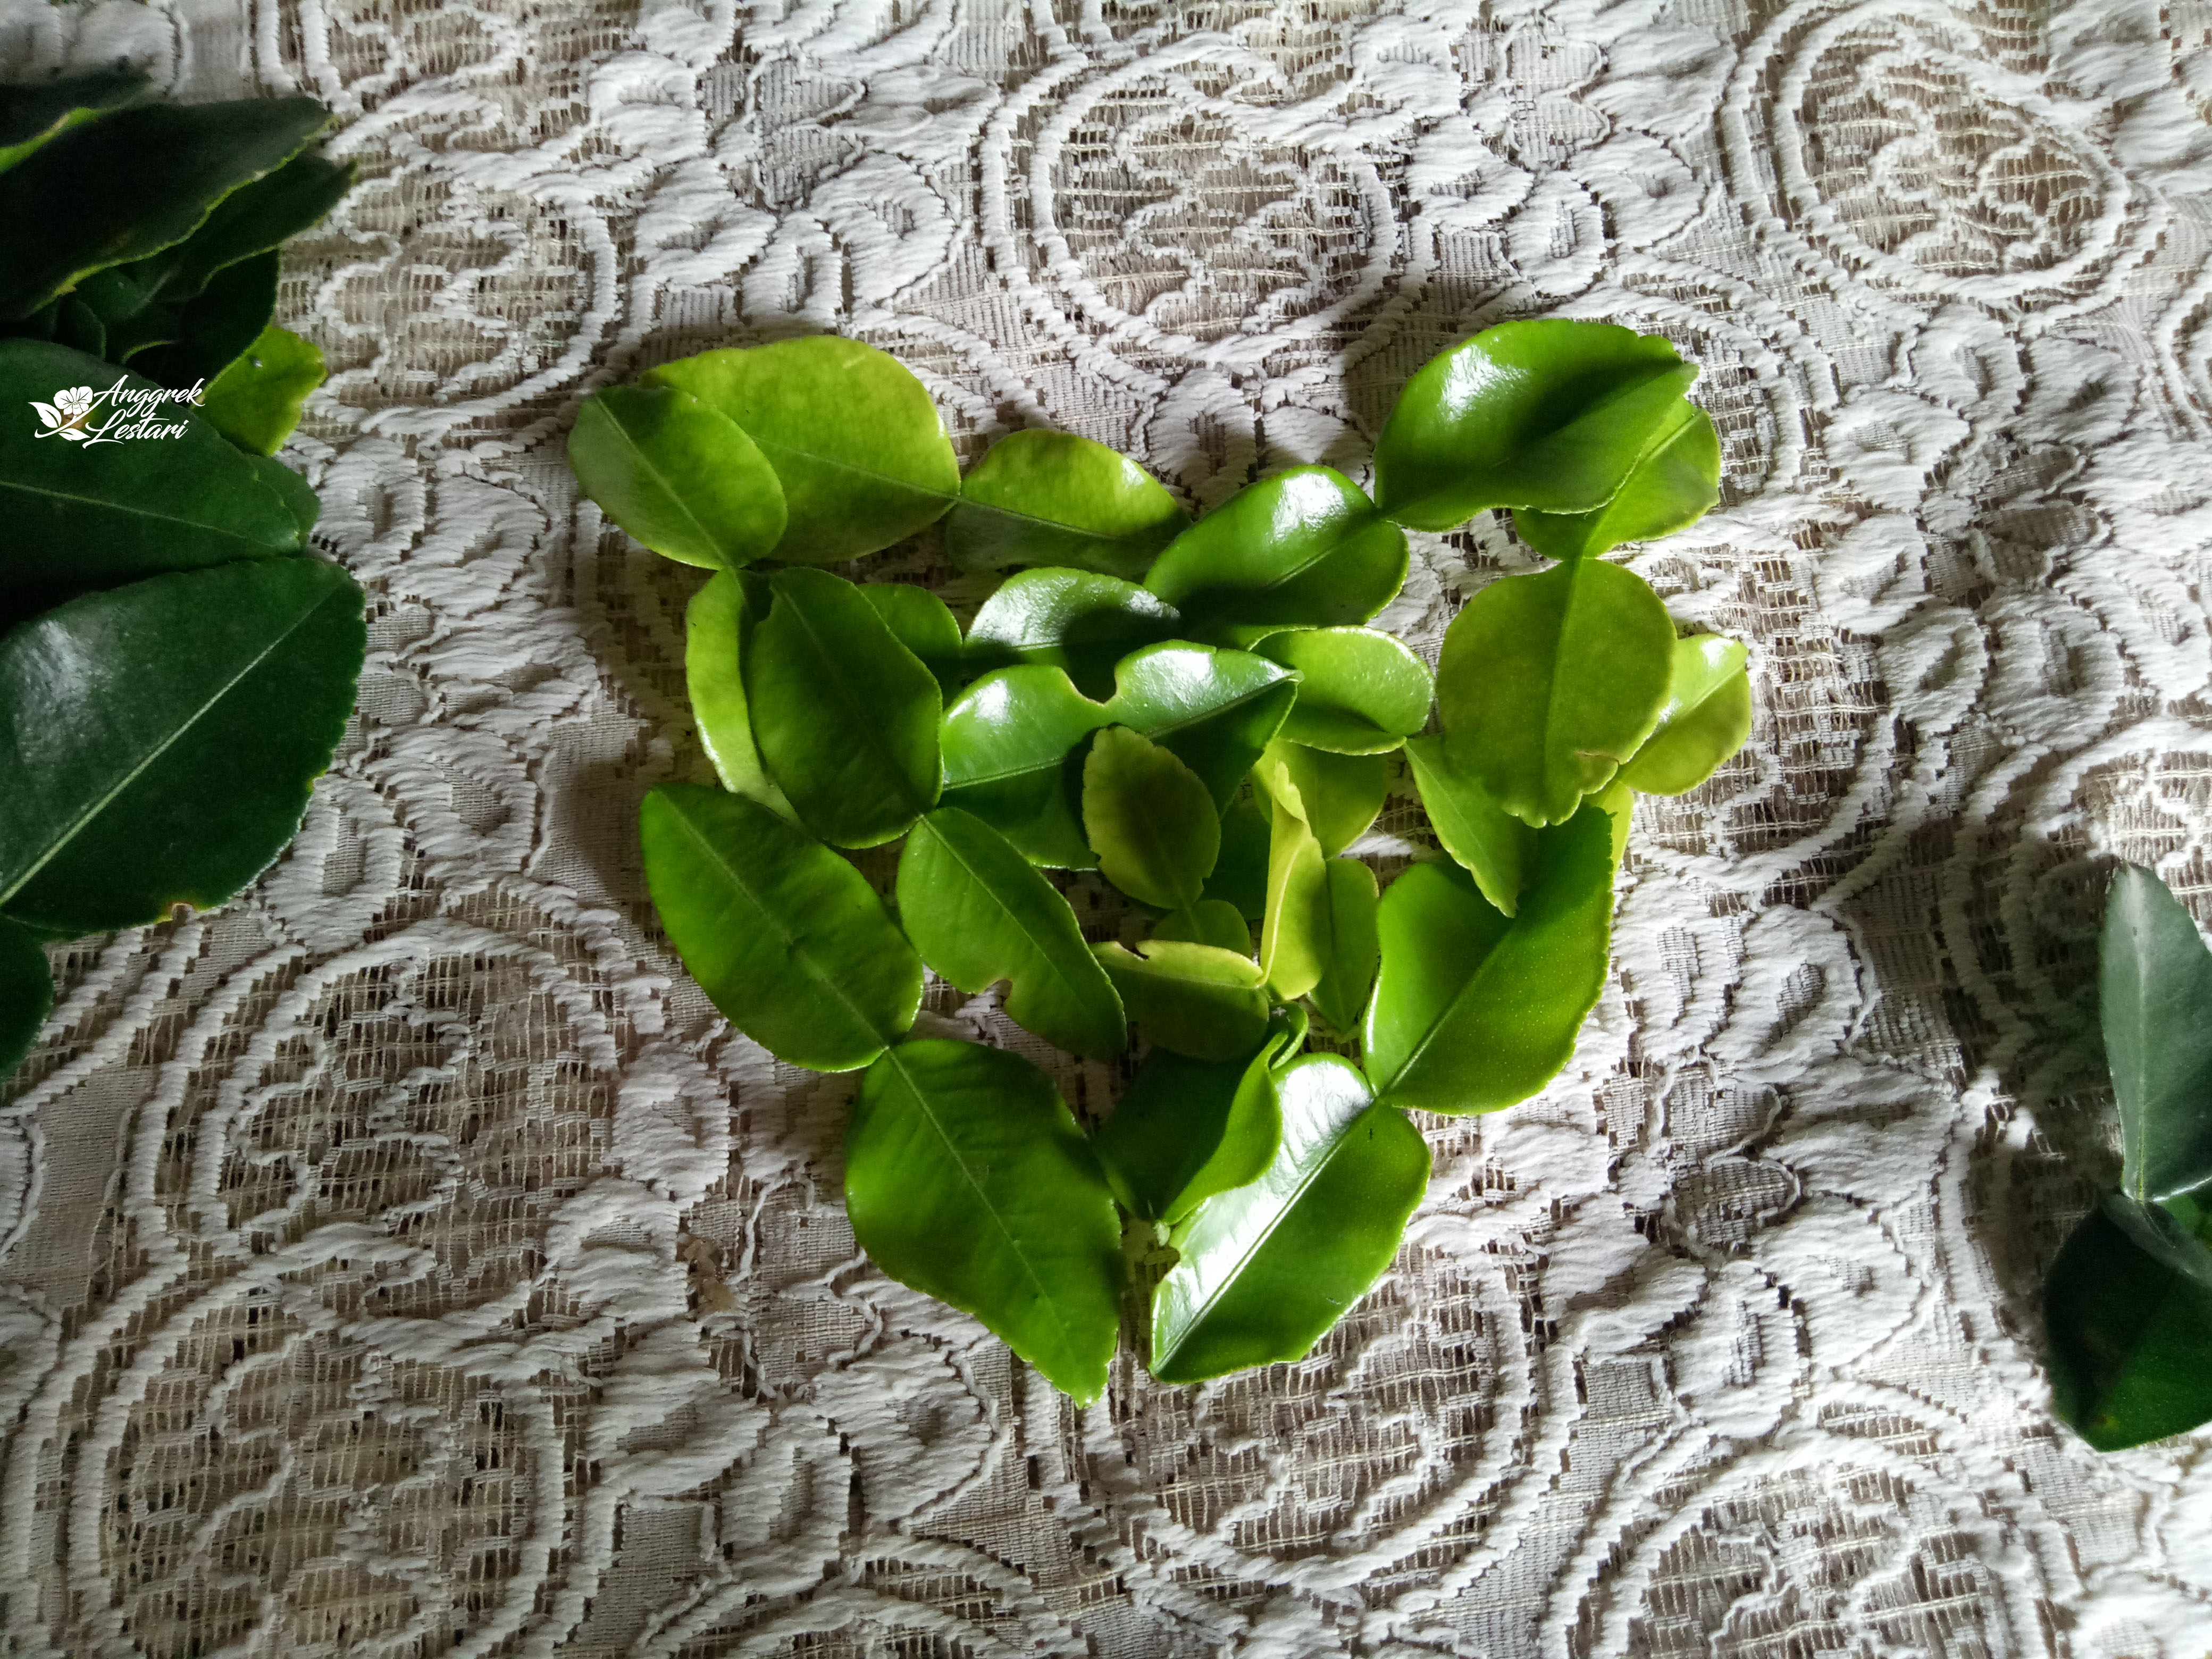 Kaffir Lime Leaves As A Natural Mosquitoes Repellent Steemit,How To Keep Cats Away From Your Property